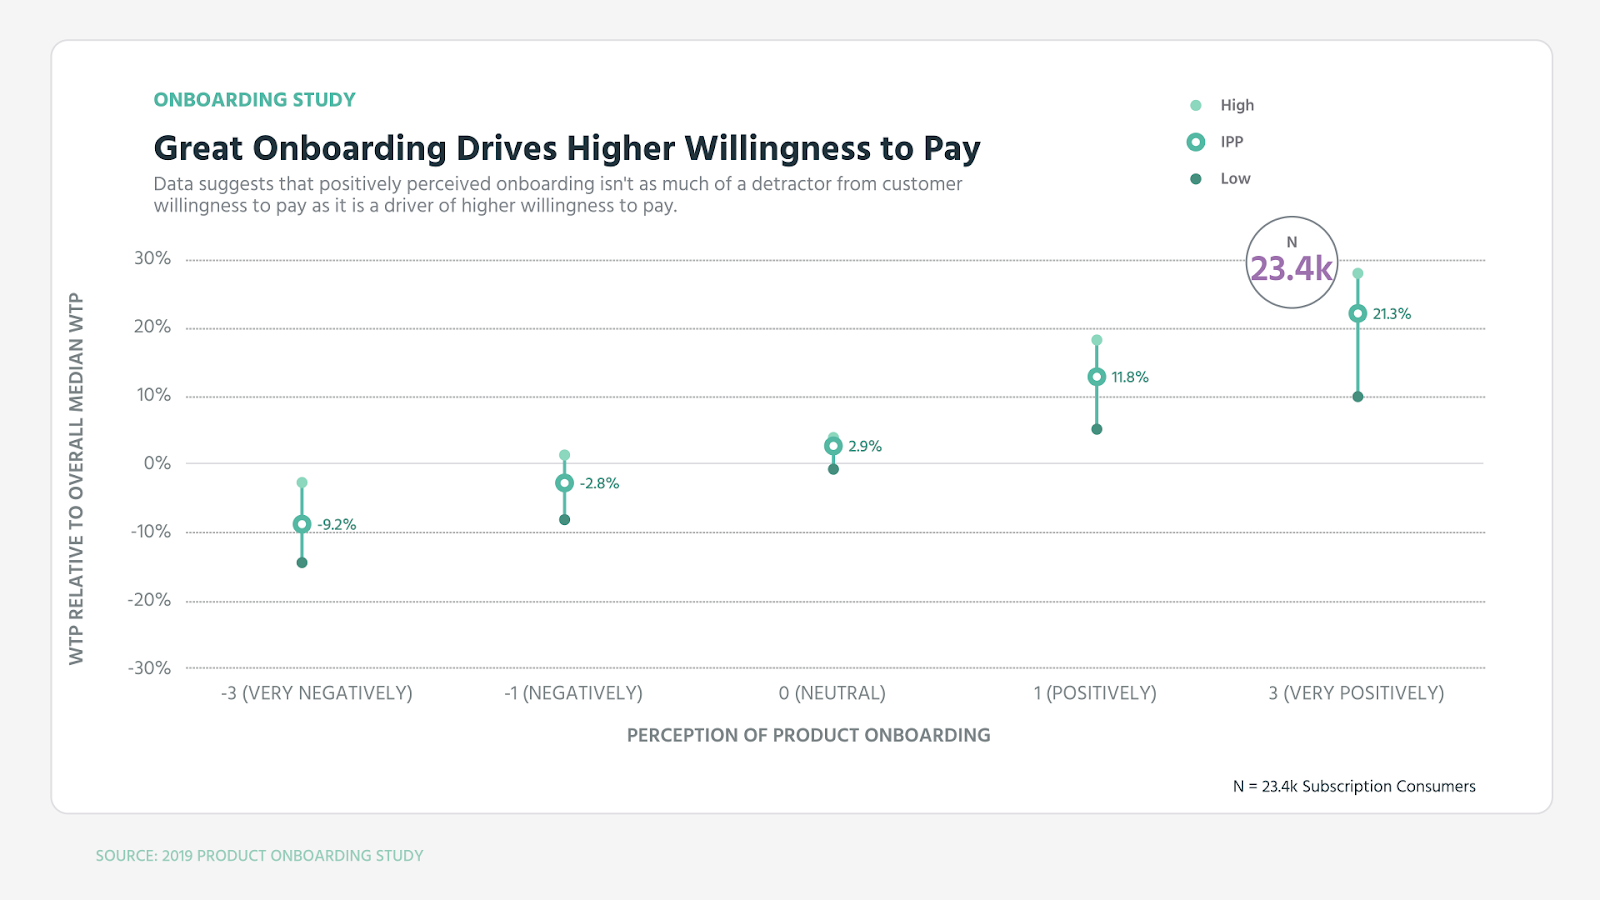 ProfitWell's onboarding study of how great onboarding drives higher willingess to pay